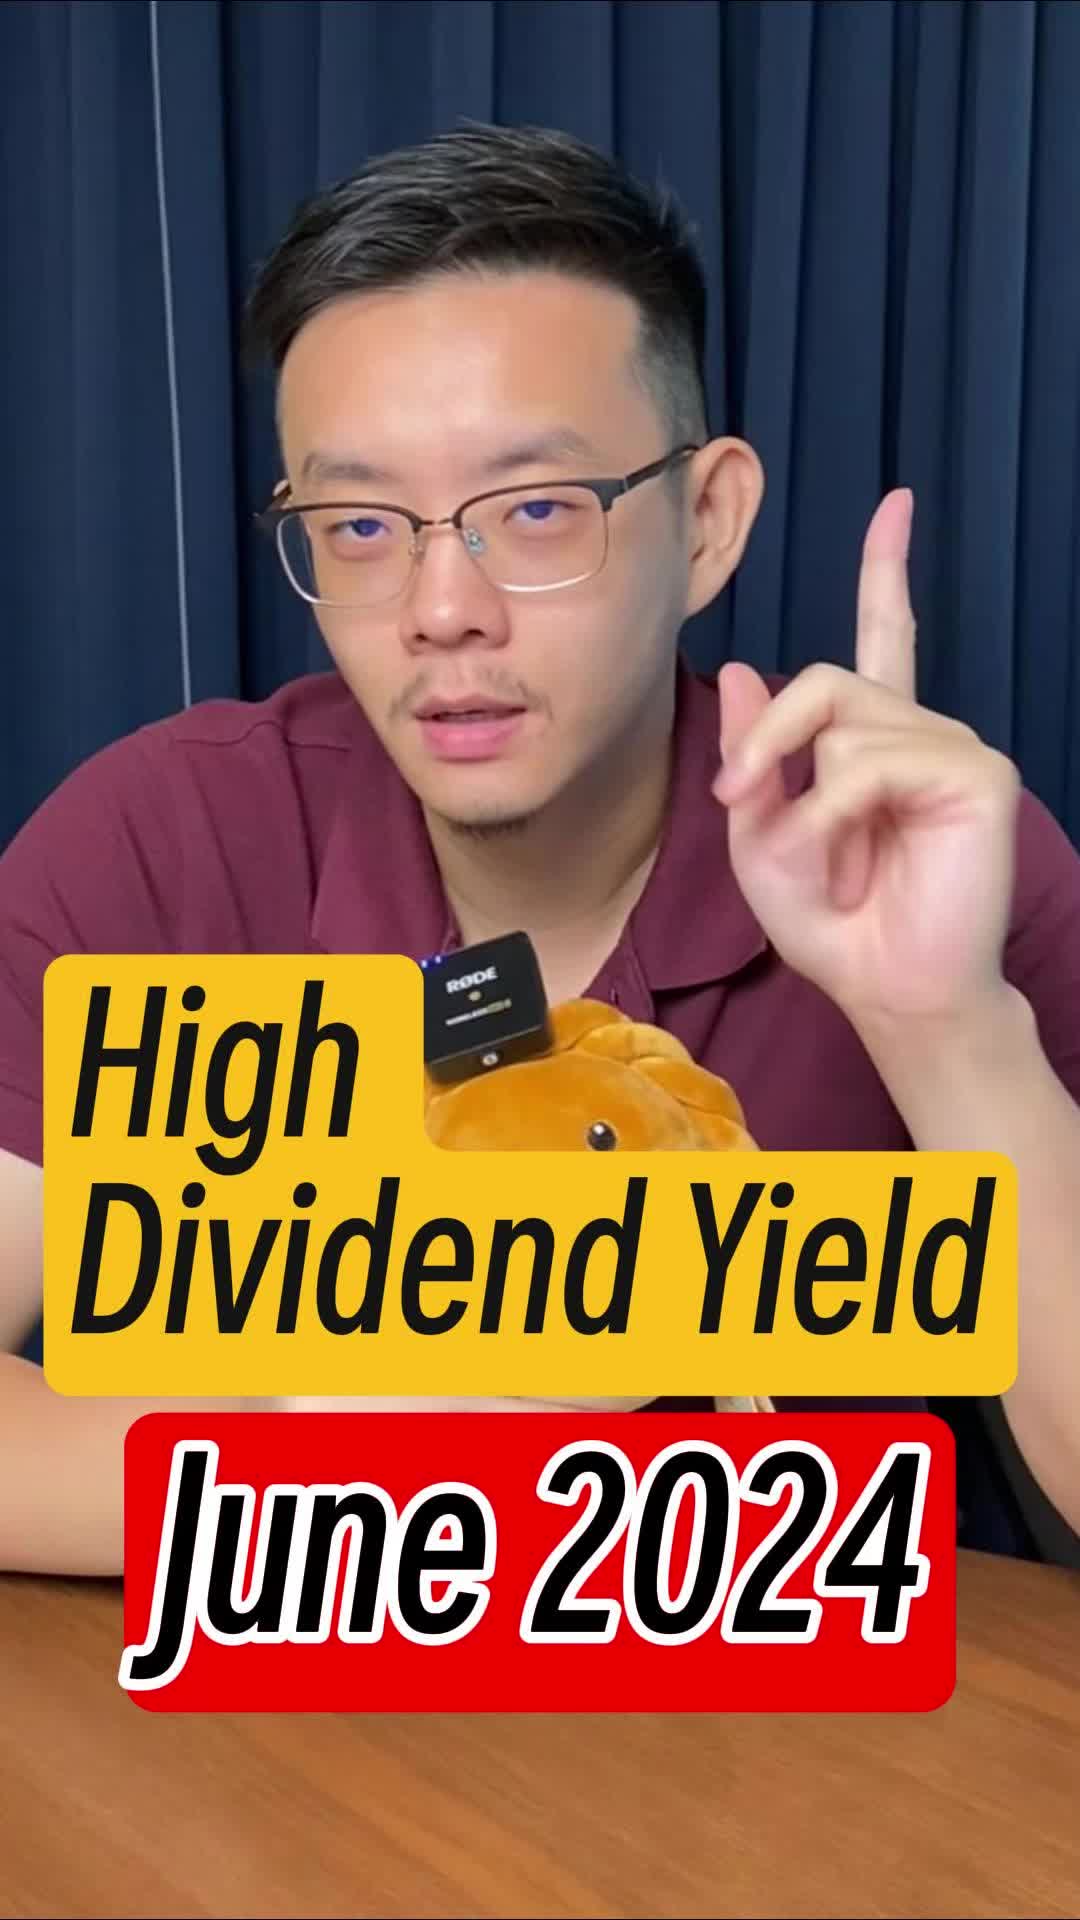 High dividend yield stocks in June 2024